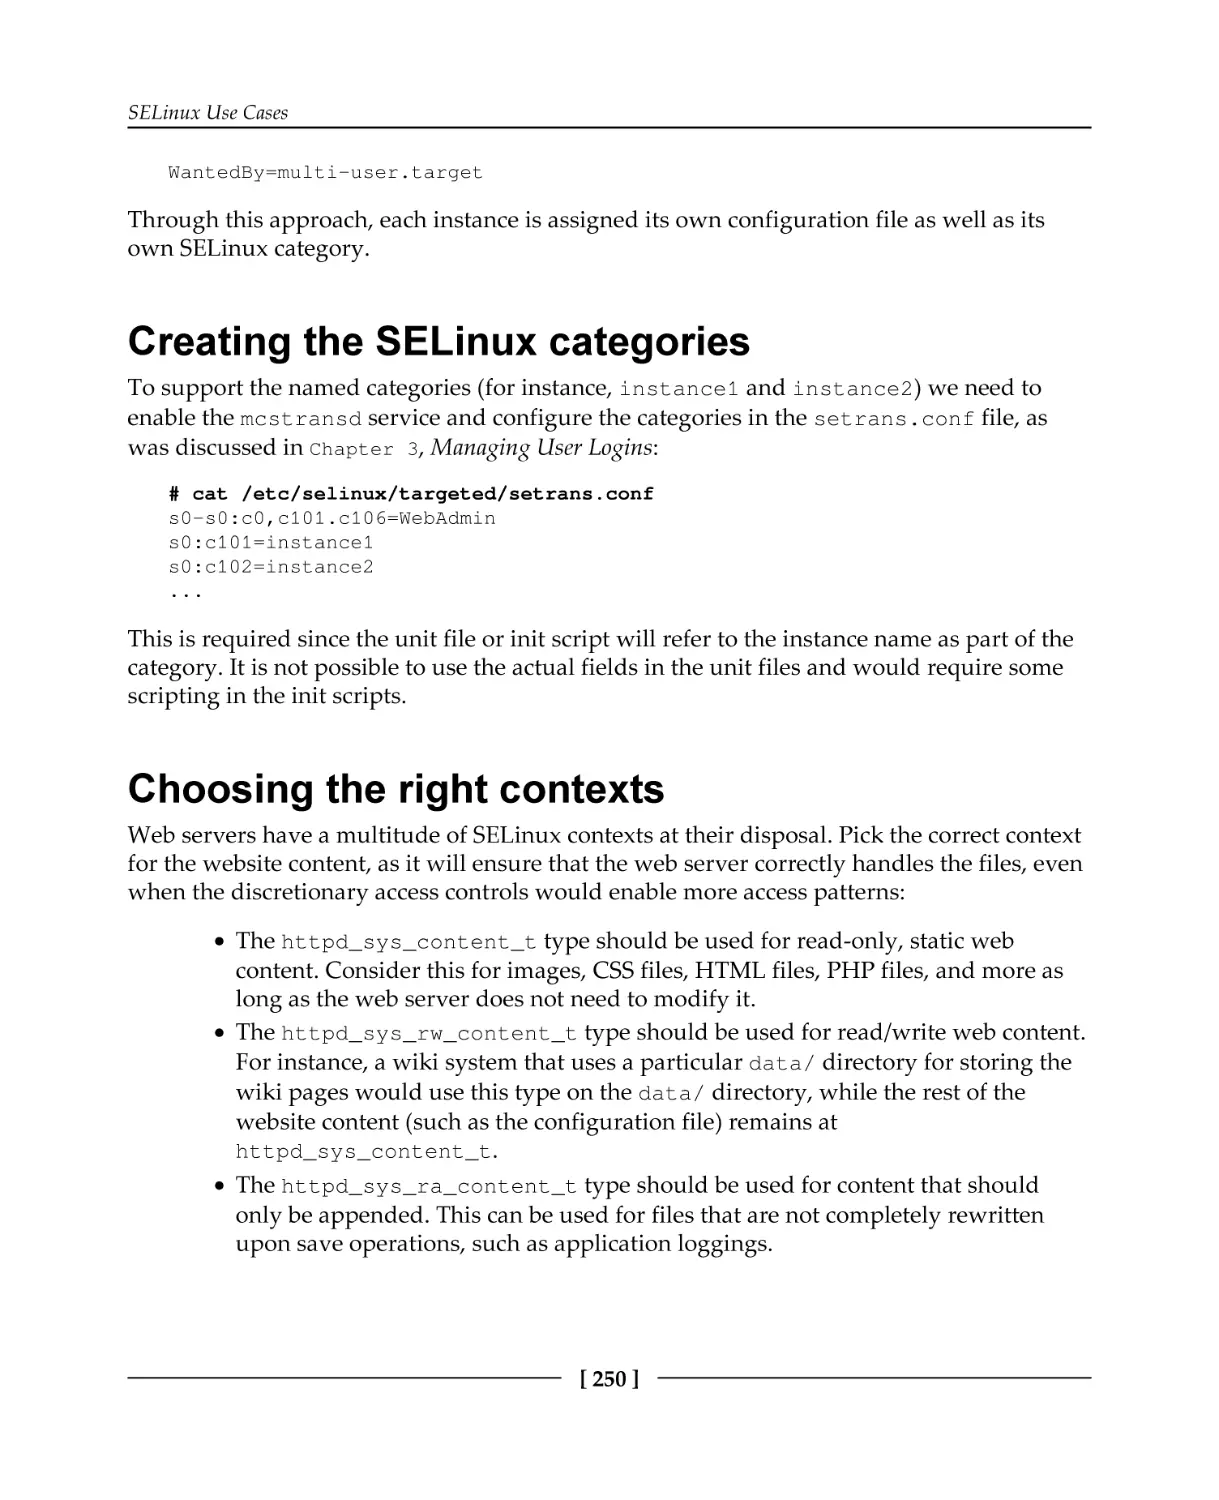 Creating the SELinux categories
Choosing the right contexts